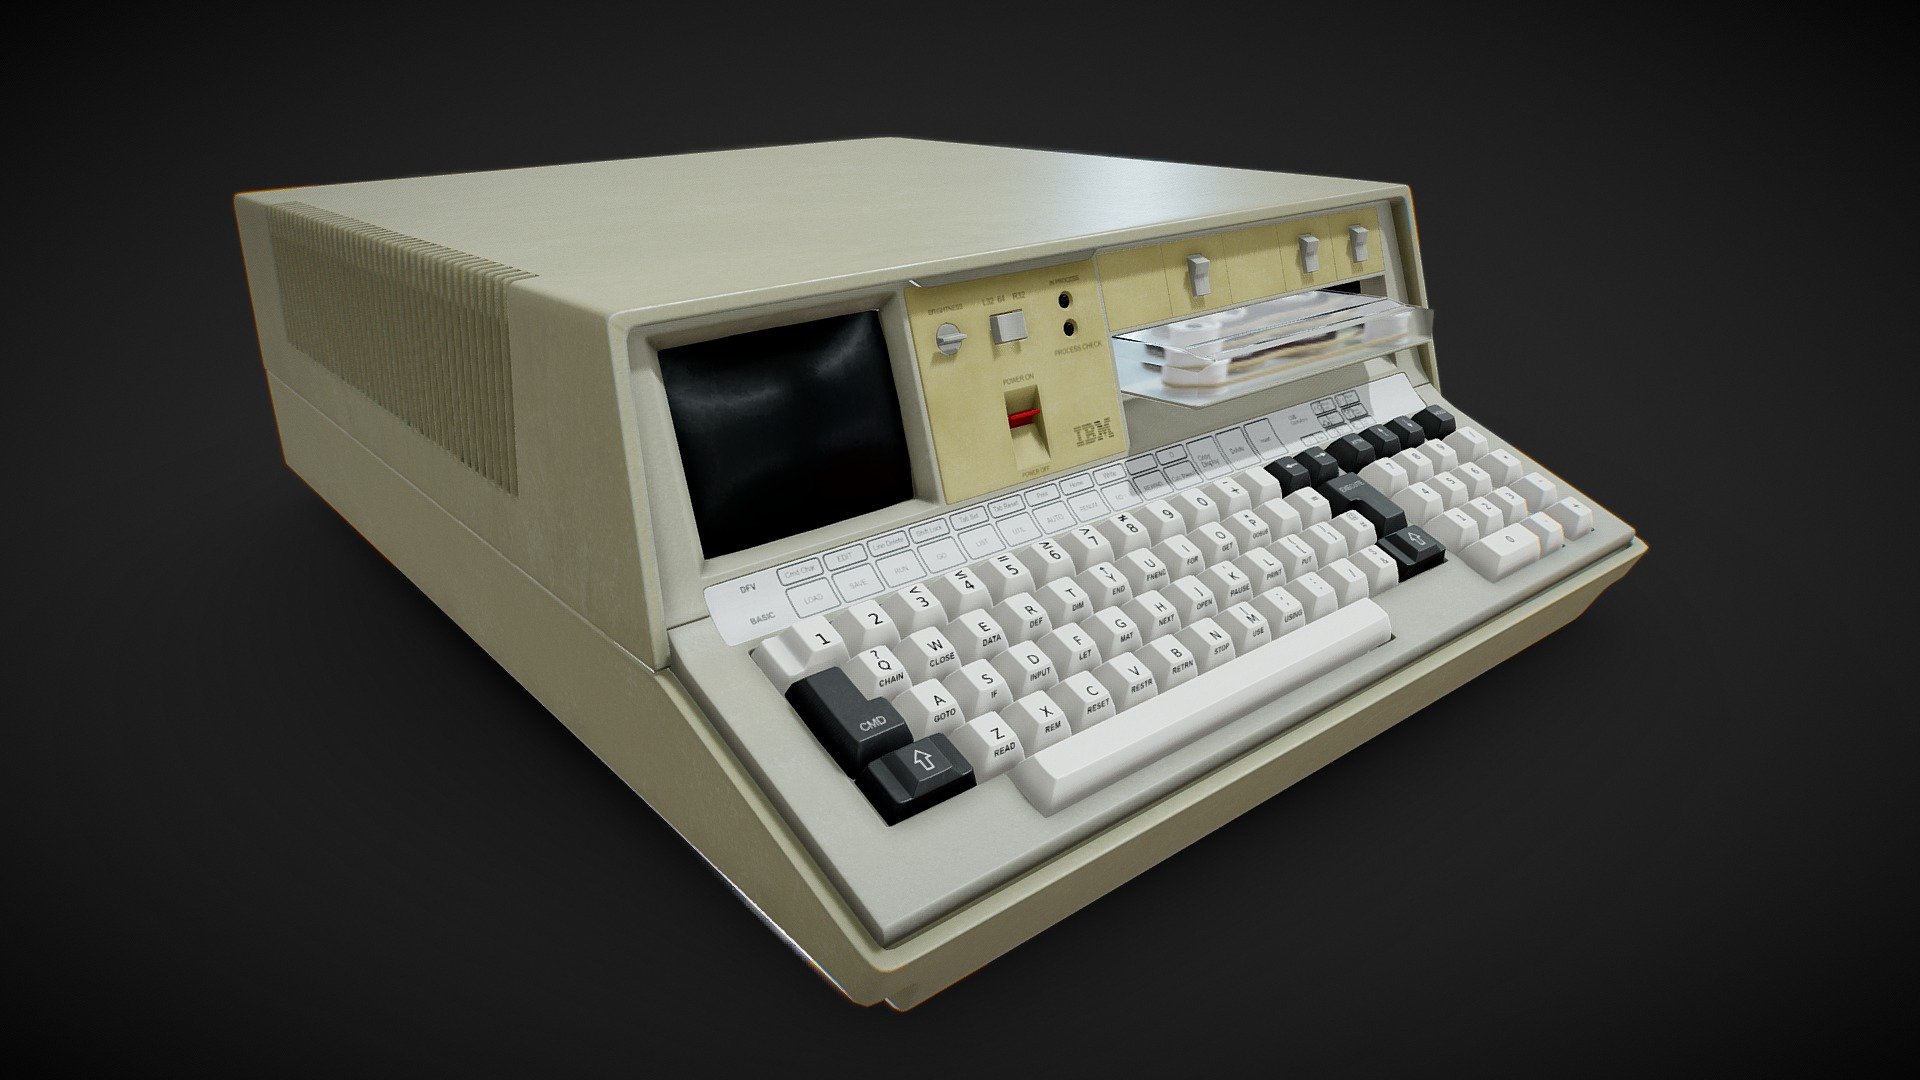 IBM 5100
I made this model to practice and use everything I learned while making grenade models and I wanted to make something related to retro tech for along time.
This is the low poly version of the model if you need access to the high poly version and baked textures please contact me on Instagram. or drop me an email.


Download Includes:
1 Fbx File (Model is divided into 5 pieces).
Blend file with everything already setup.
Textures.

Note: You will have to make your glass shader for the front cover and make sure you're using the Front_Cover_2K_Normal.png texture for the normal map input 3d model